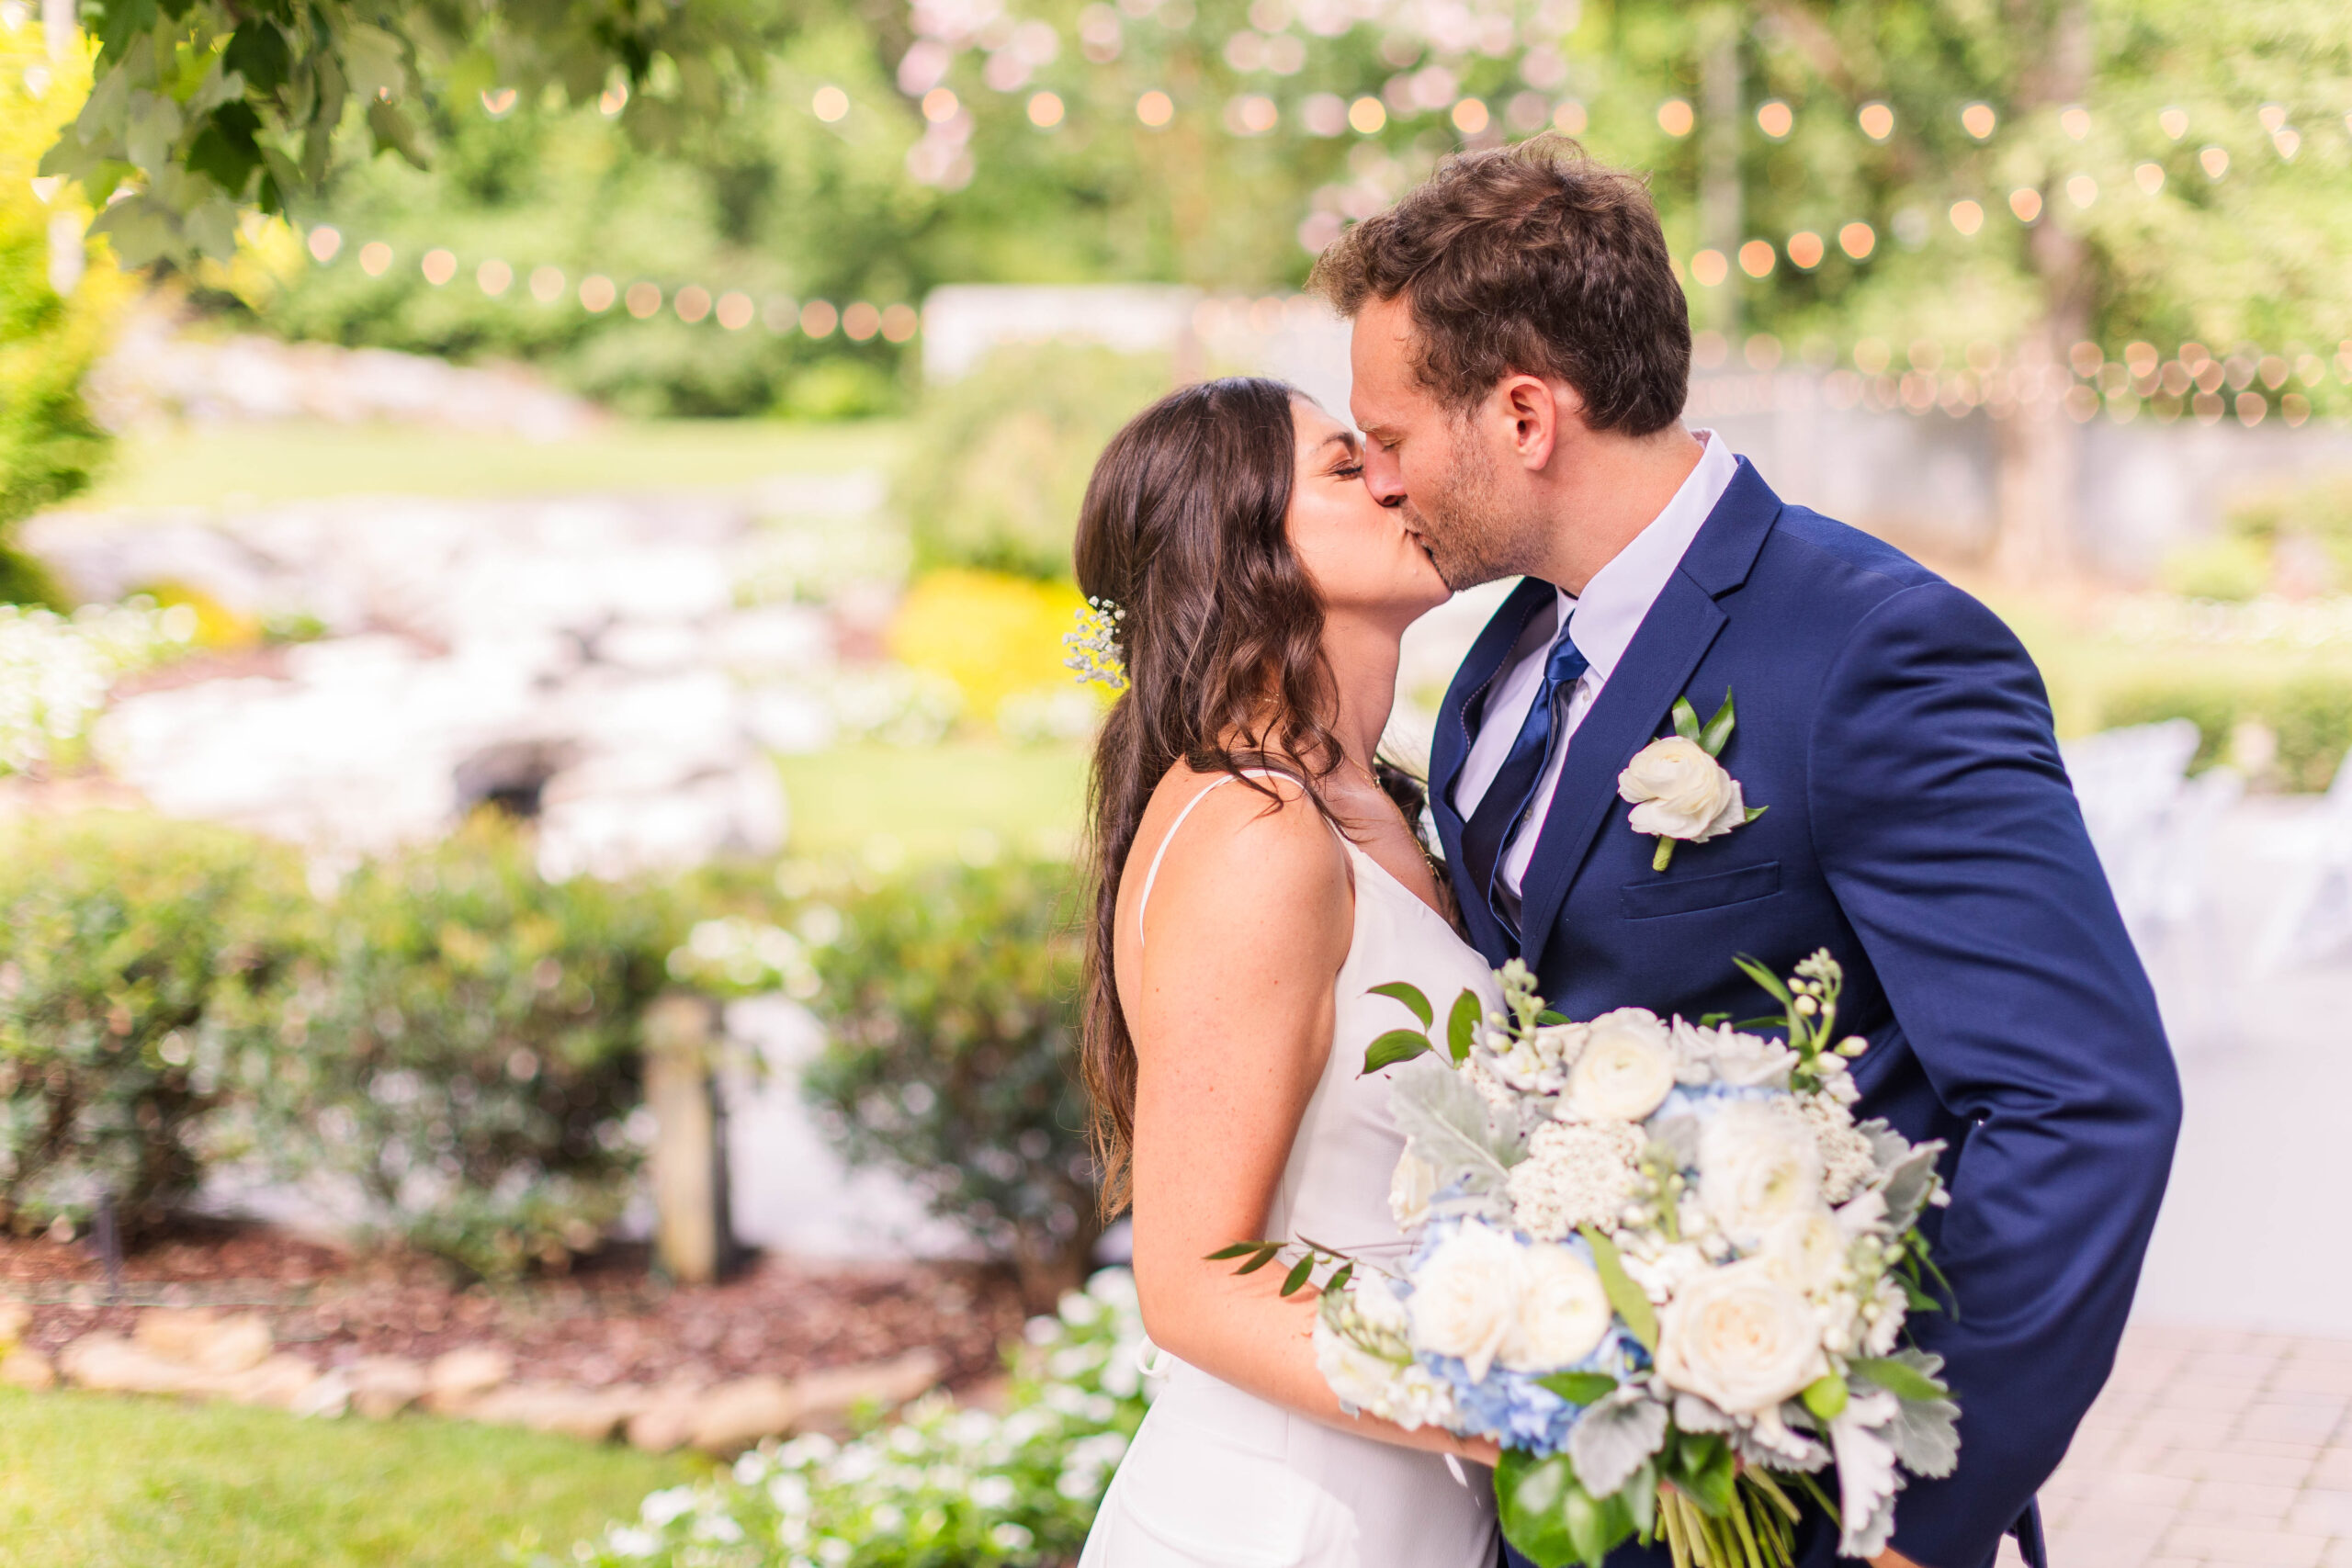 Emily + Ryan share a newlywed kiss after their wedding ceremony at The Venue Chattanooga on a beautiful July day in Tennessee.